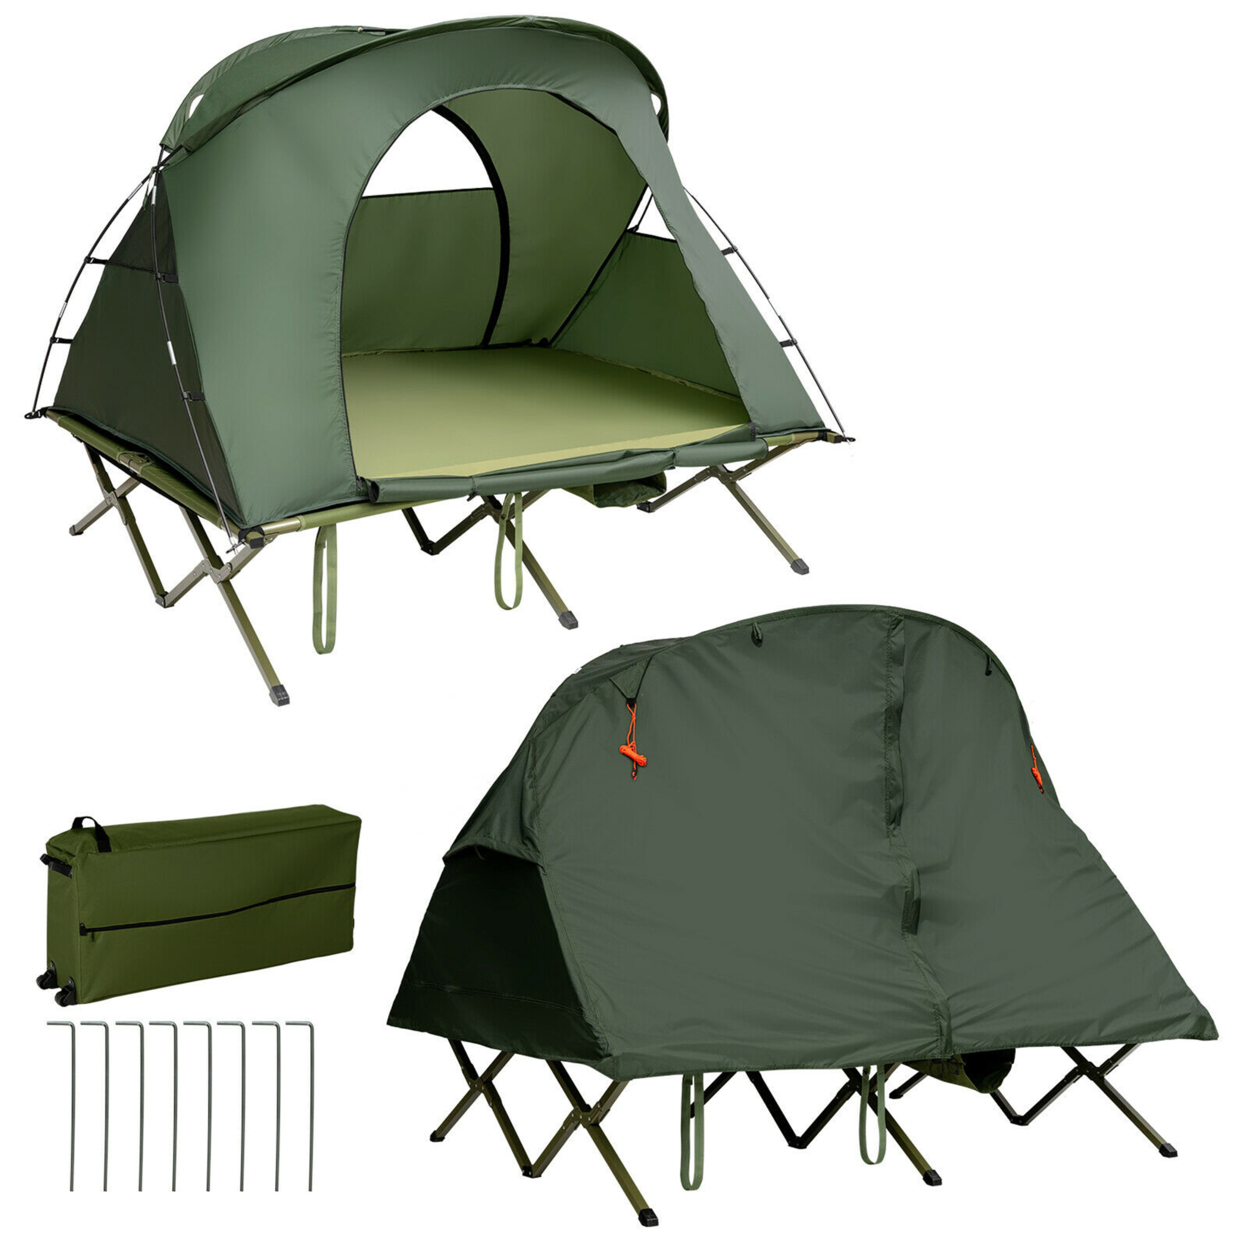 2-Person Outdoor Camping Tent Cot Elevated Compact Tent Set W/ External Cover - Green